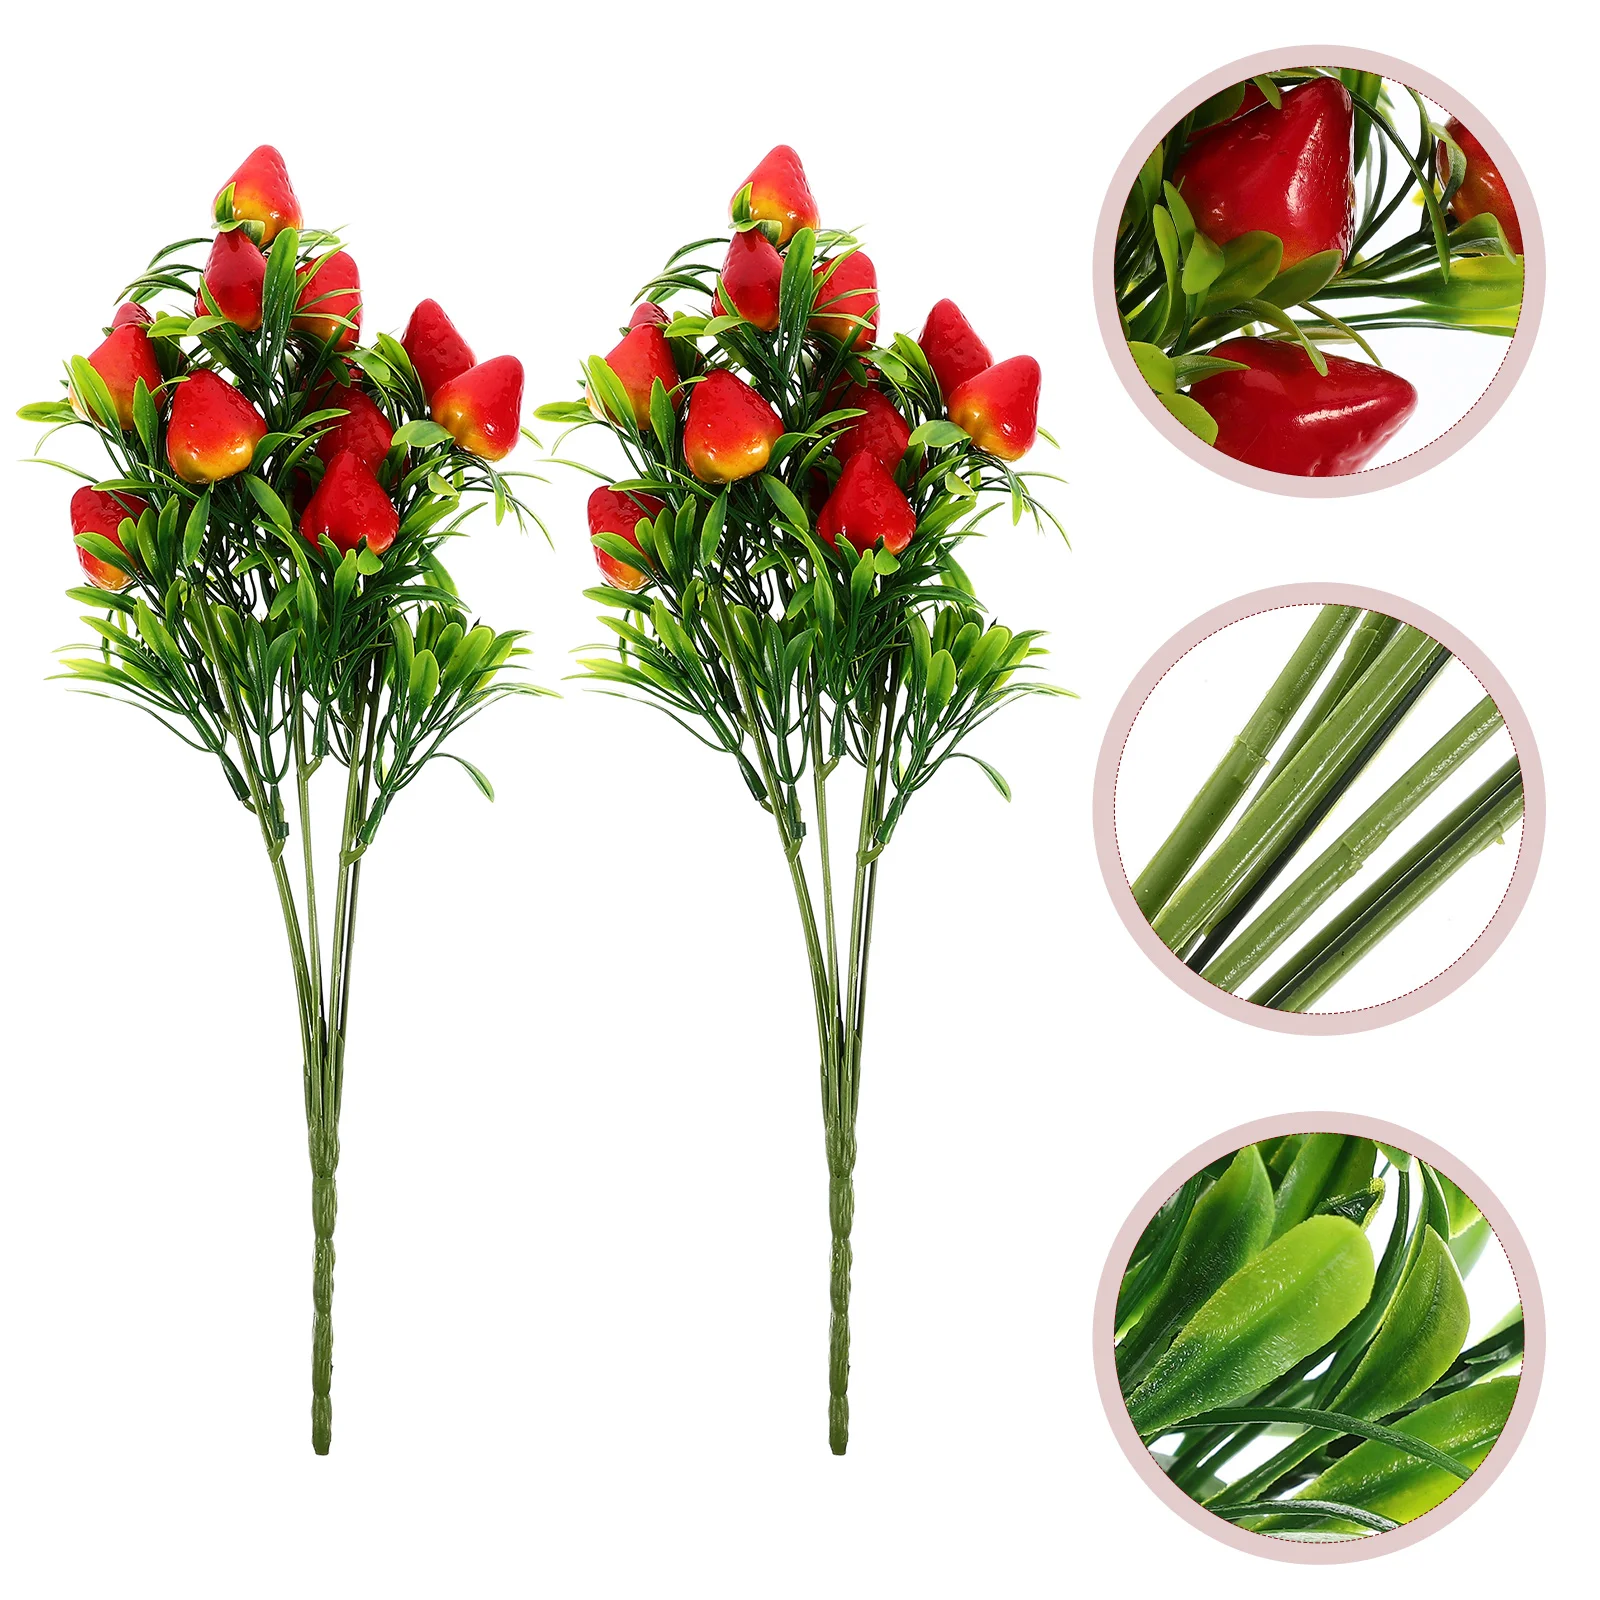 

2 Pcs Simulated Strawberry Fake Ornament Party Decorations Home Accessories Bouquet Branch Adorn Ornaments Festival Branches